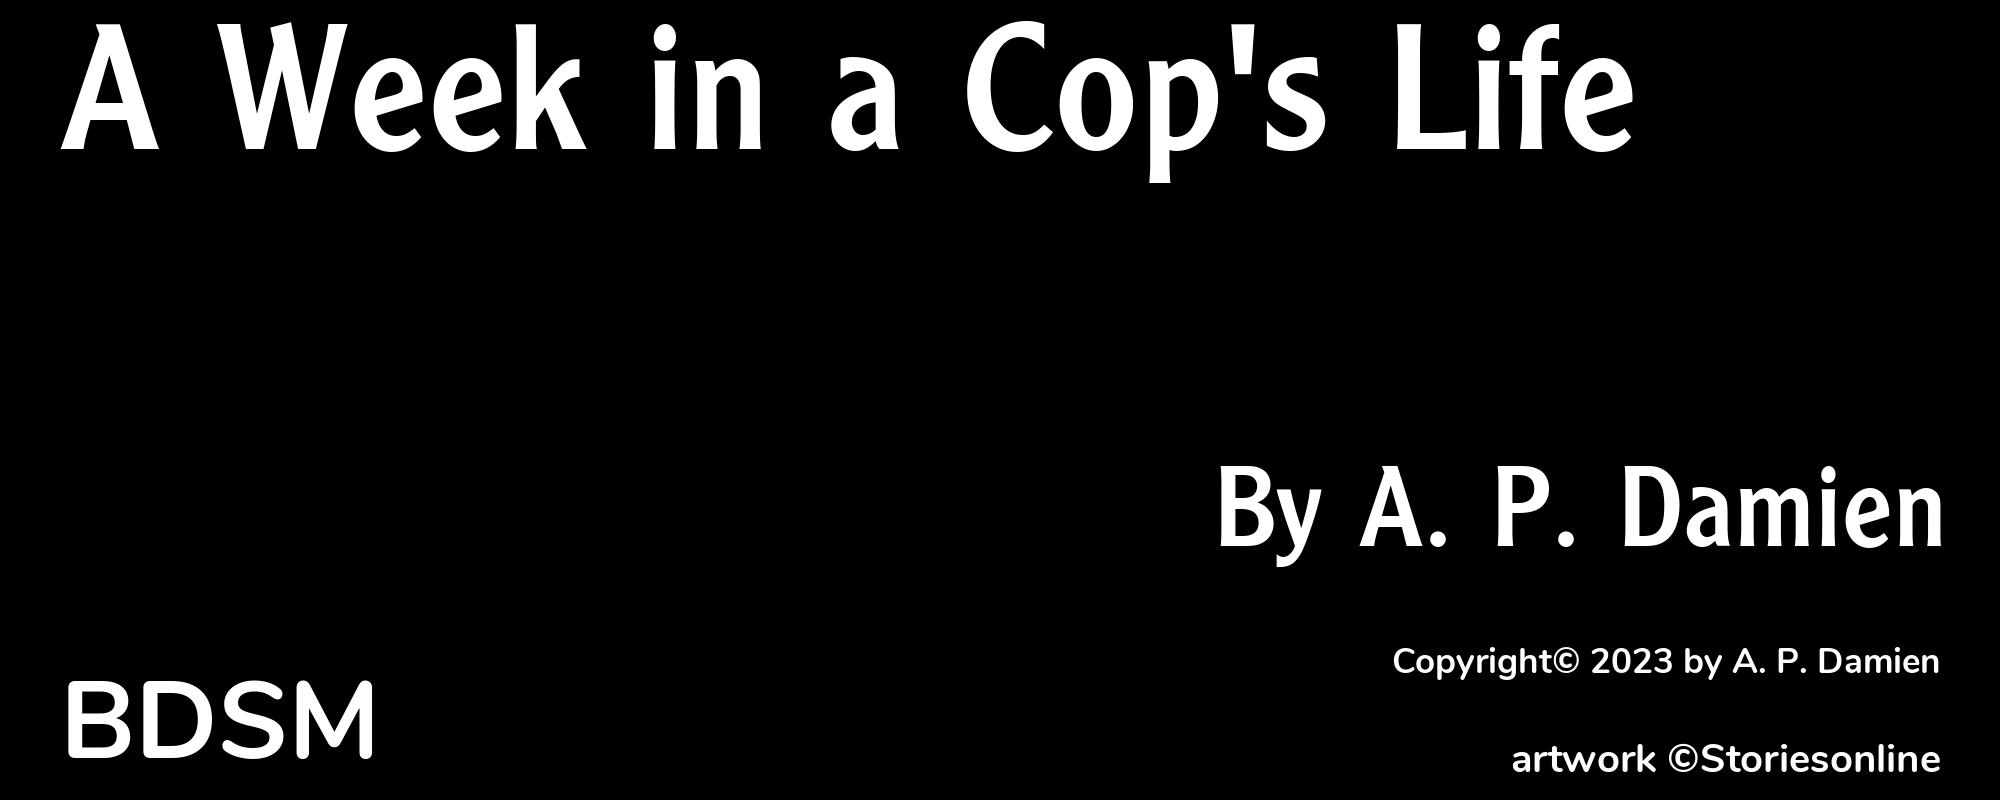 A Week in a Cop's Life - Cover